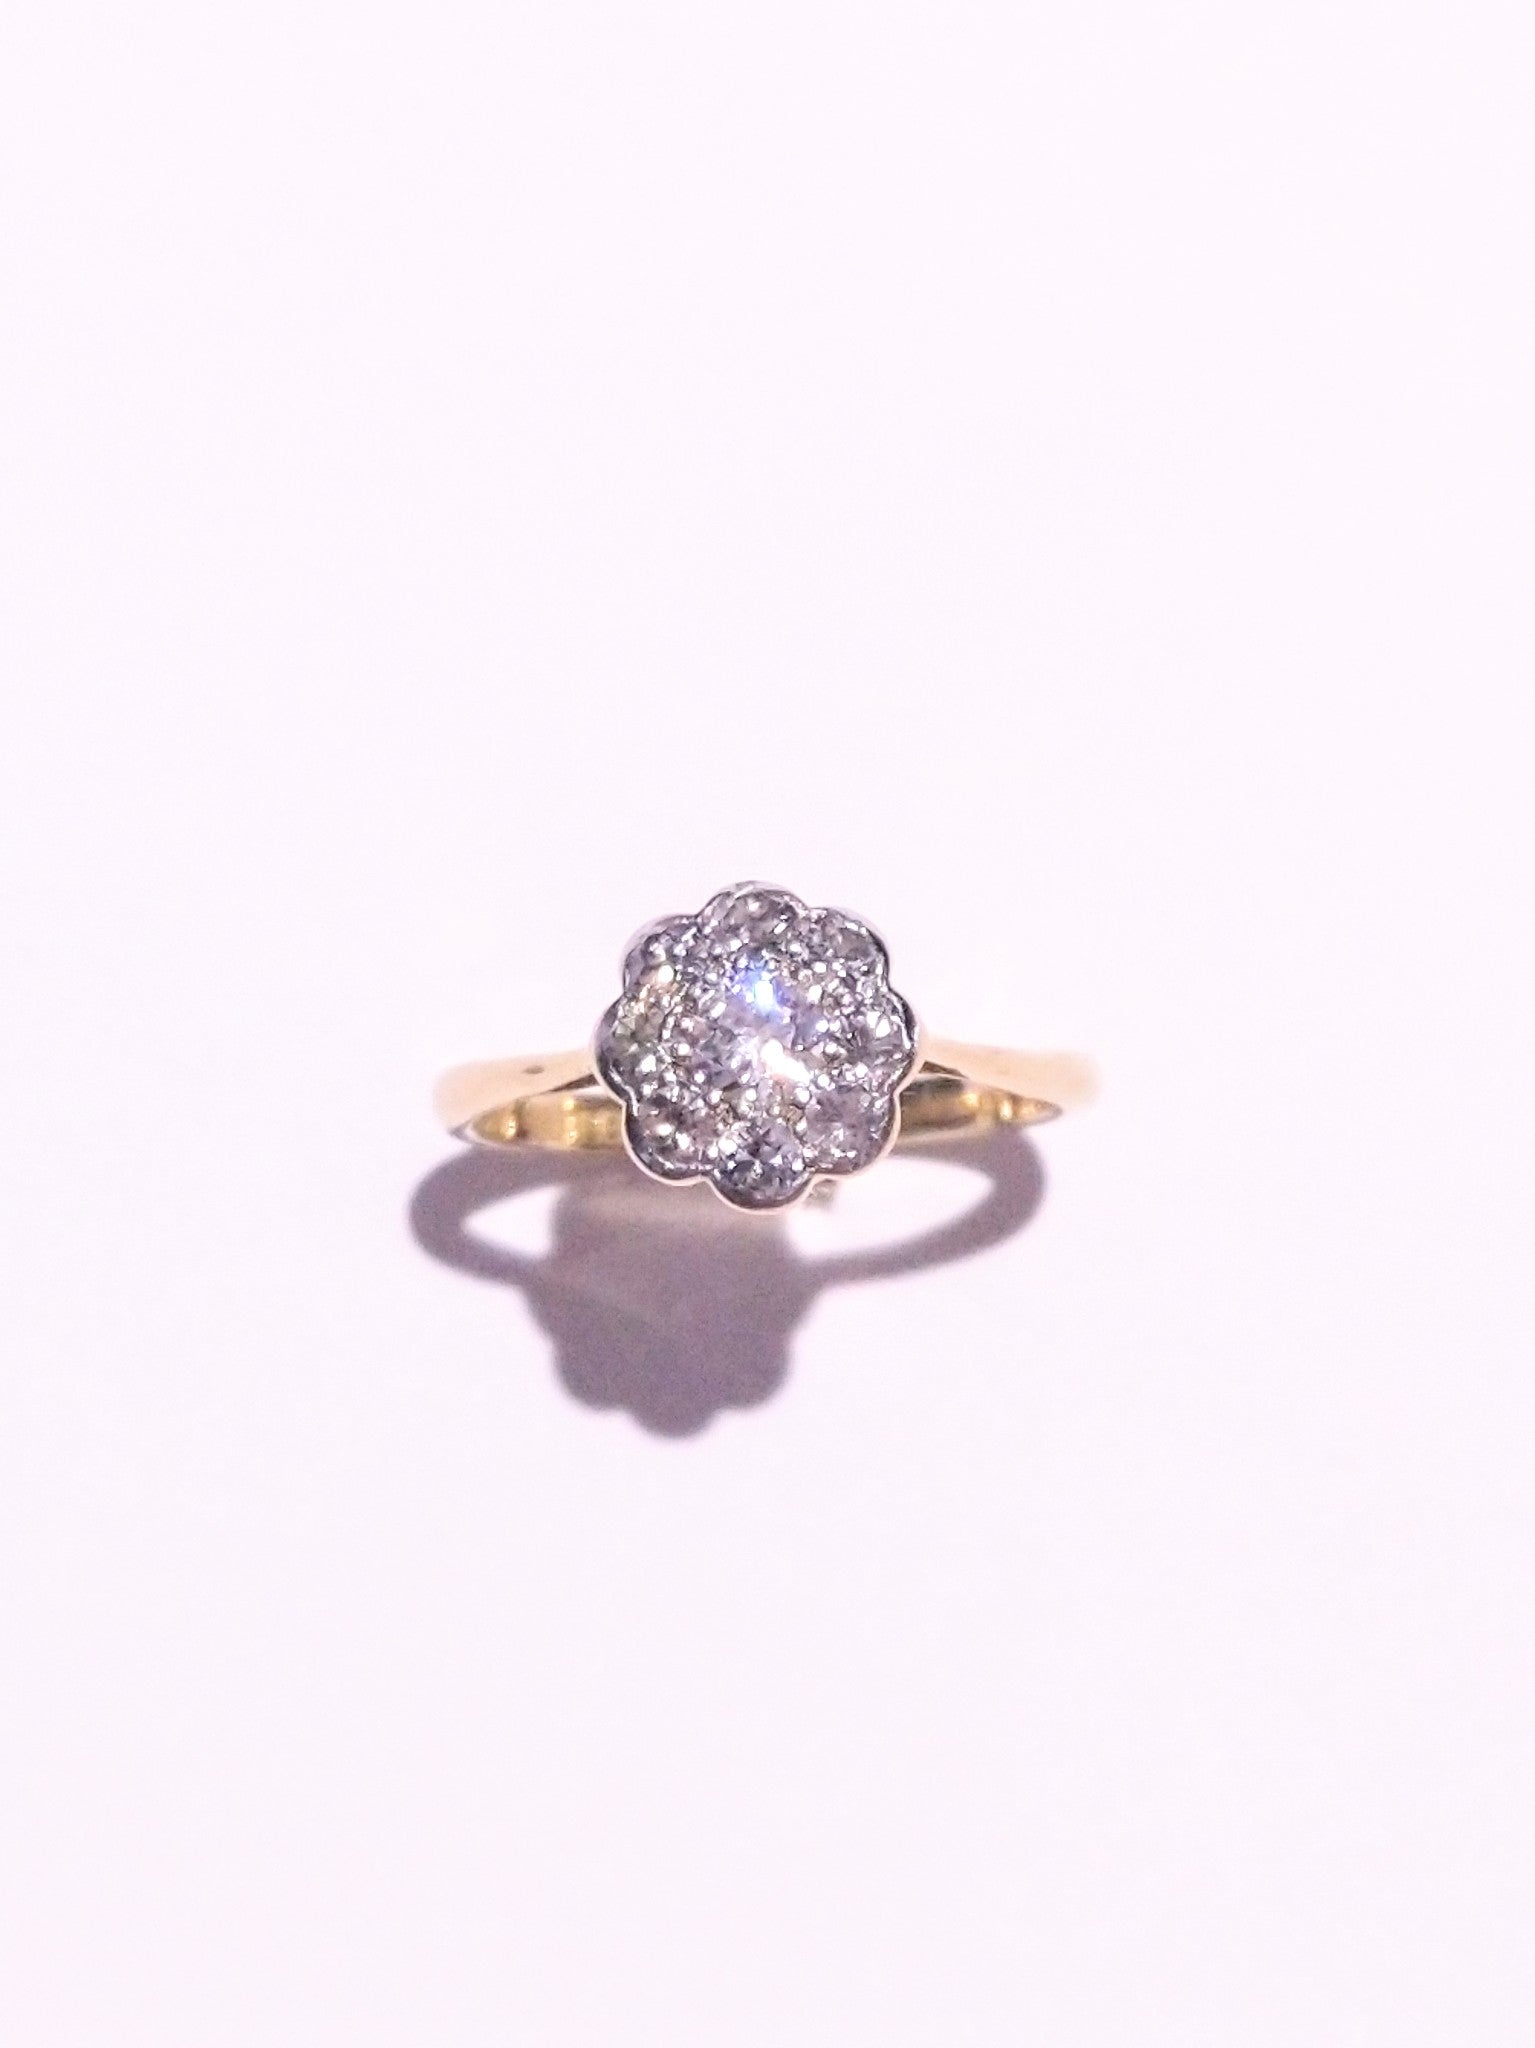 Vintage 1930s-40s Orange Blossom Old European Cut Diamond Engagement Ring –  Perry's Jewelry